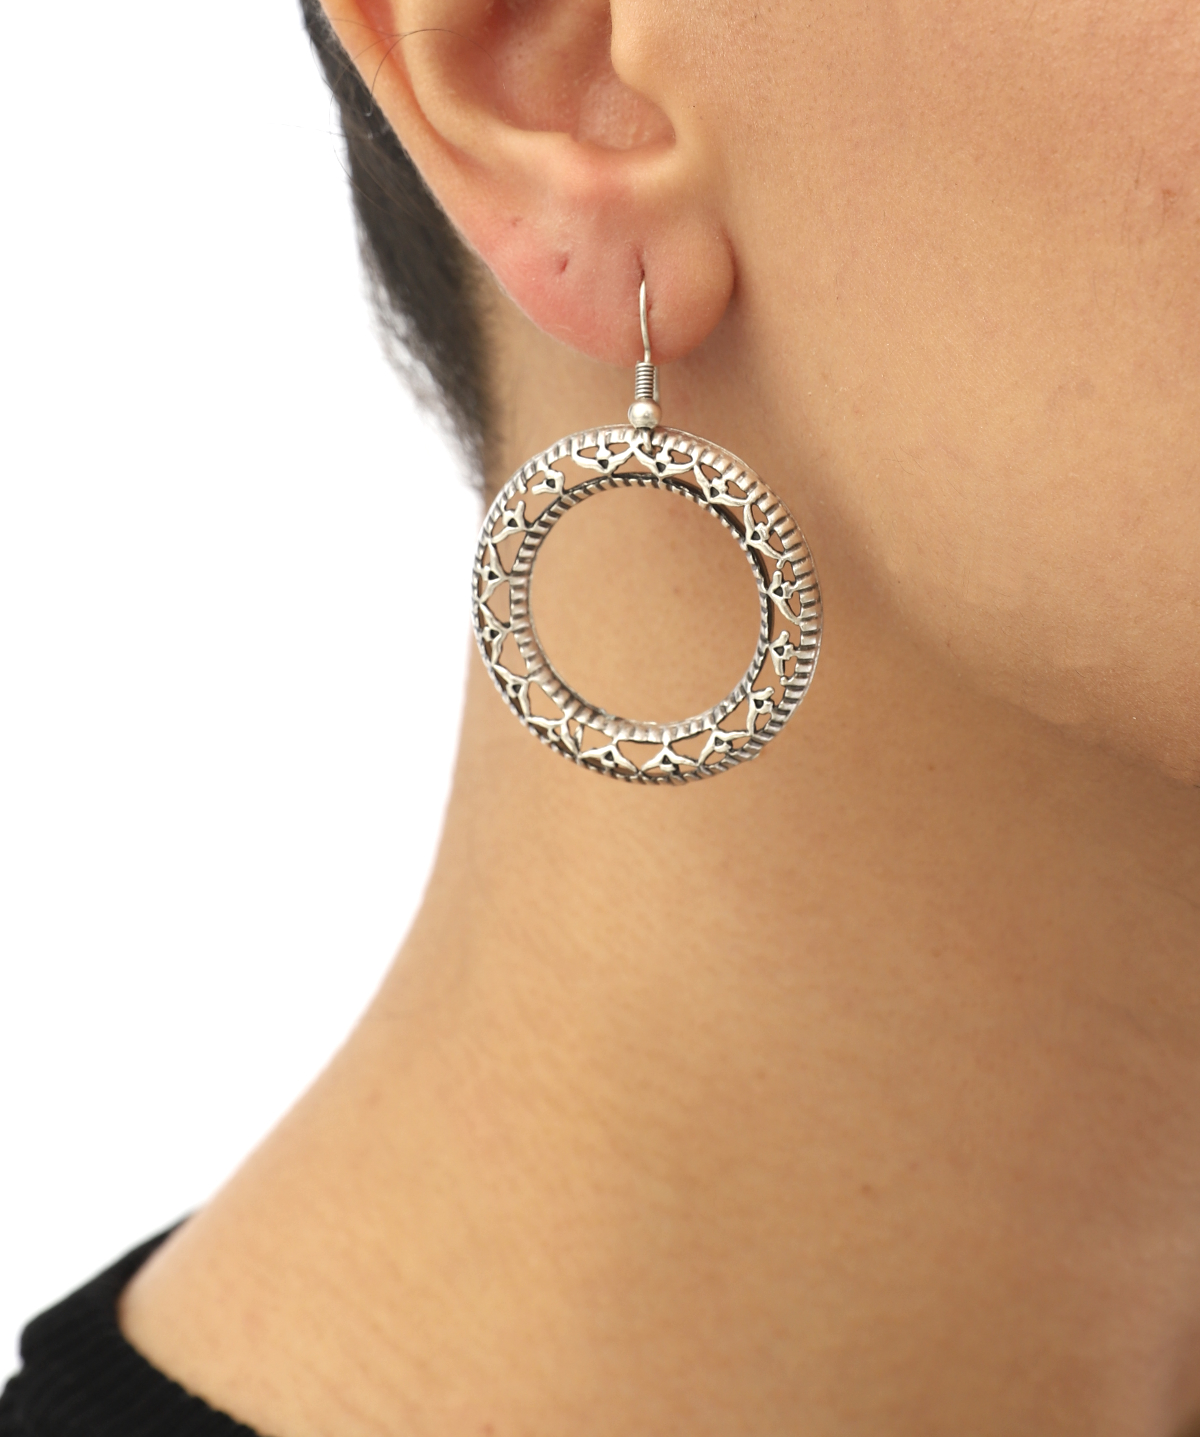 Minimal Ring Silver Plated Earrings